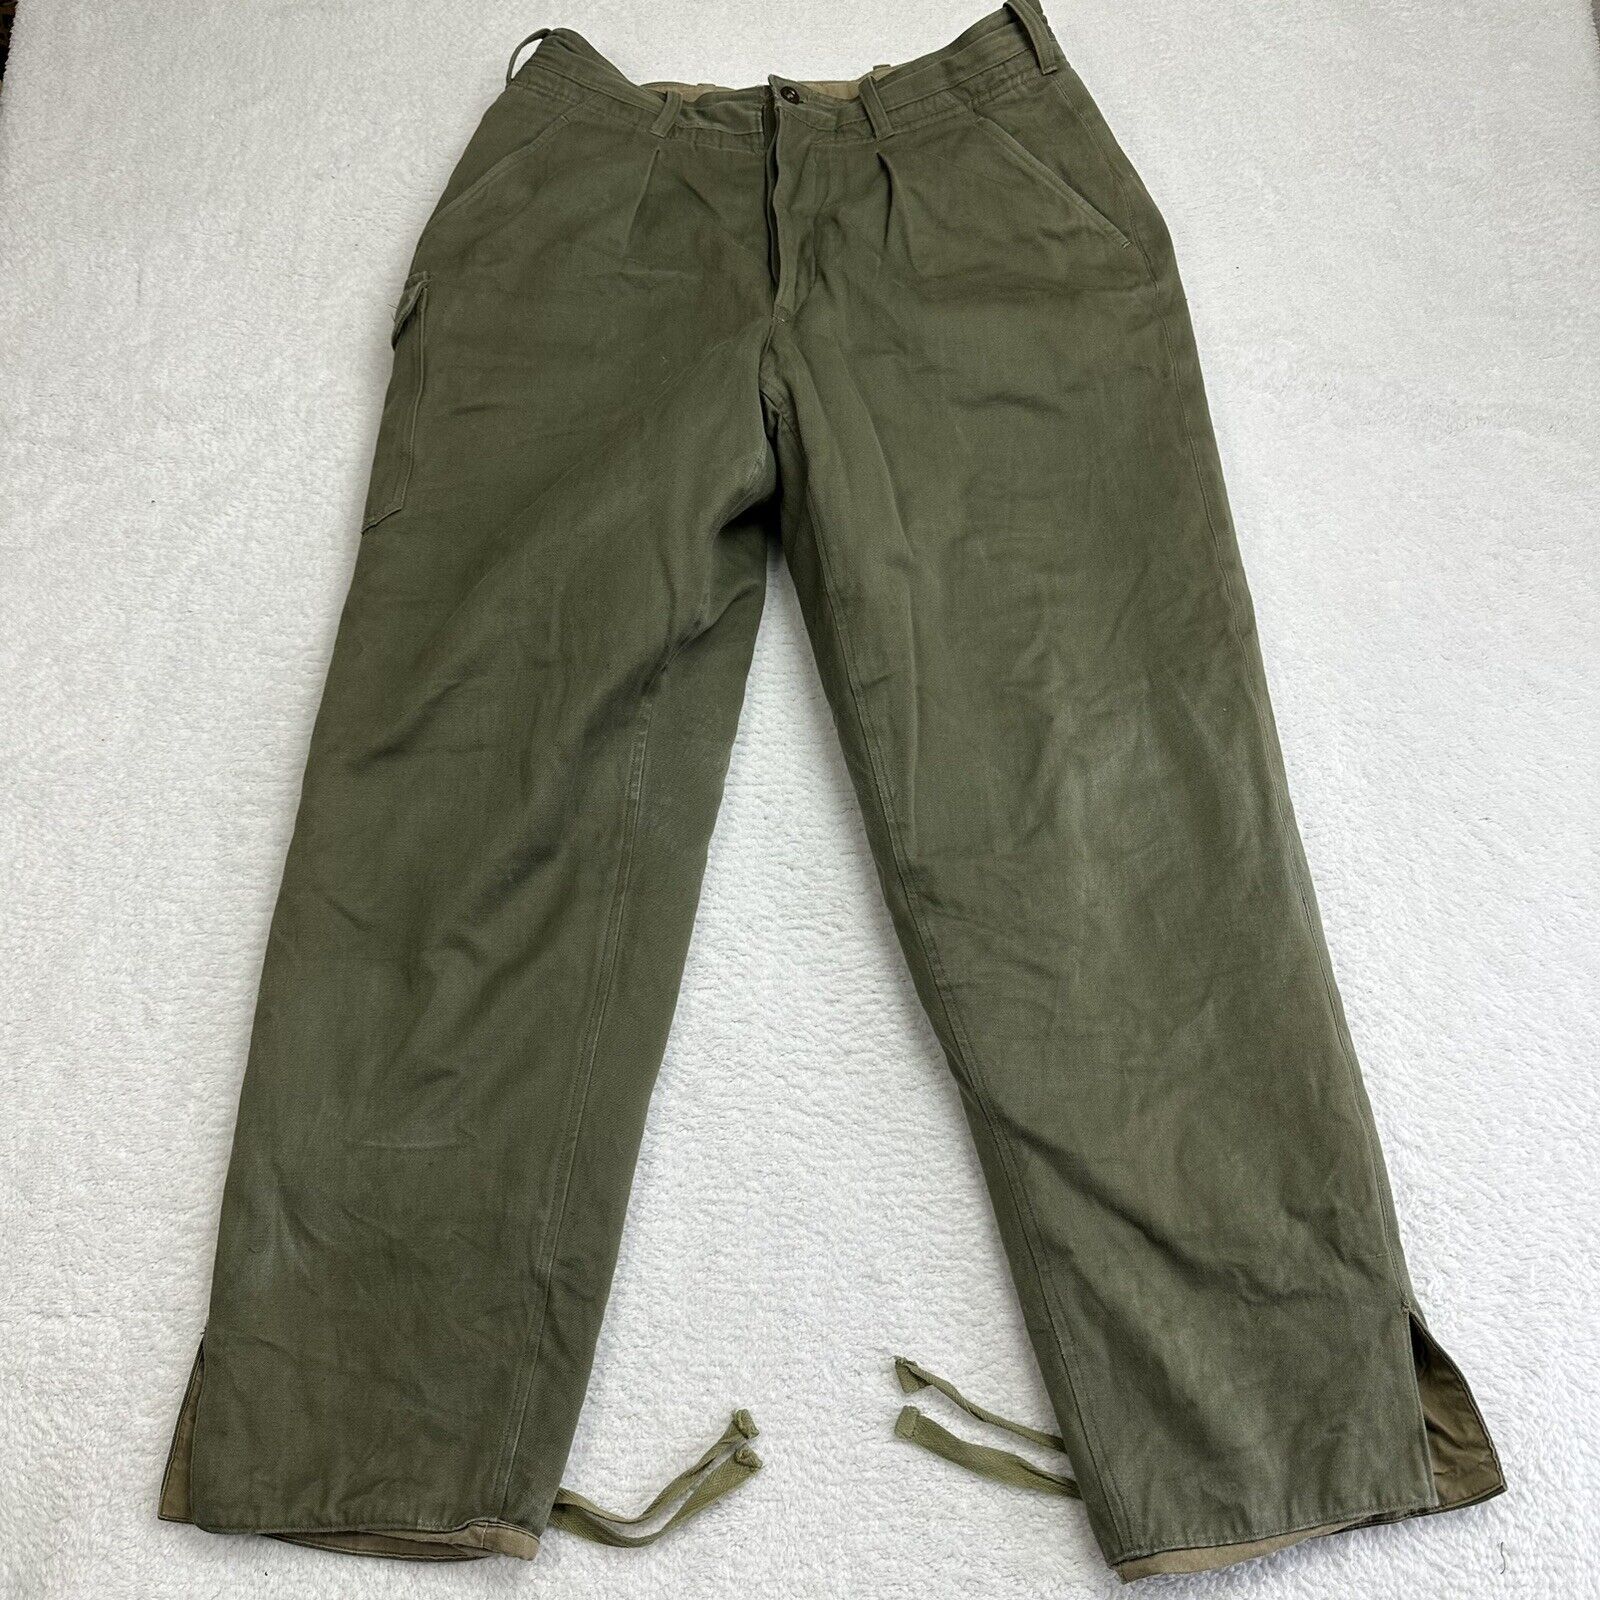 Vintage US Military Trousers Size 32x29 Quilt Lined Insulated Green 40s 50s